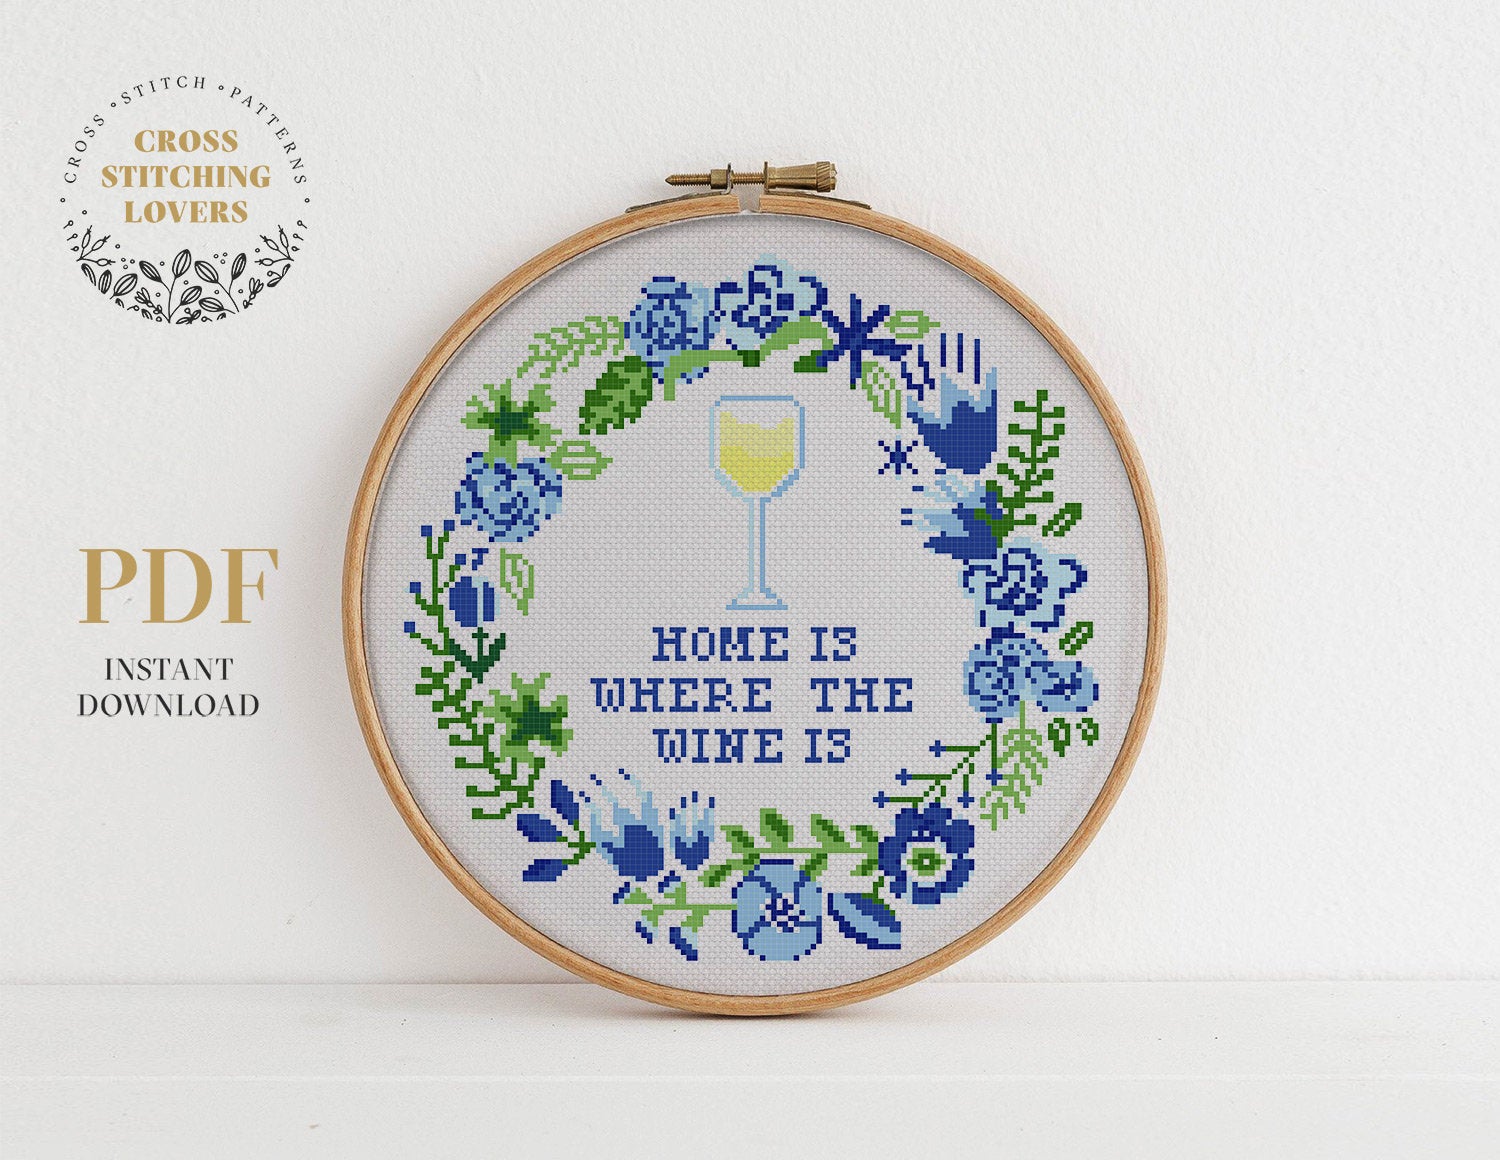 Home is where the wine is - Cross stitch pattern